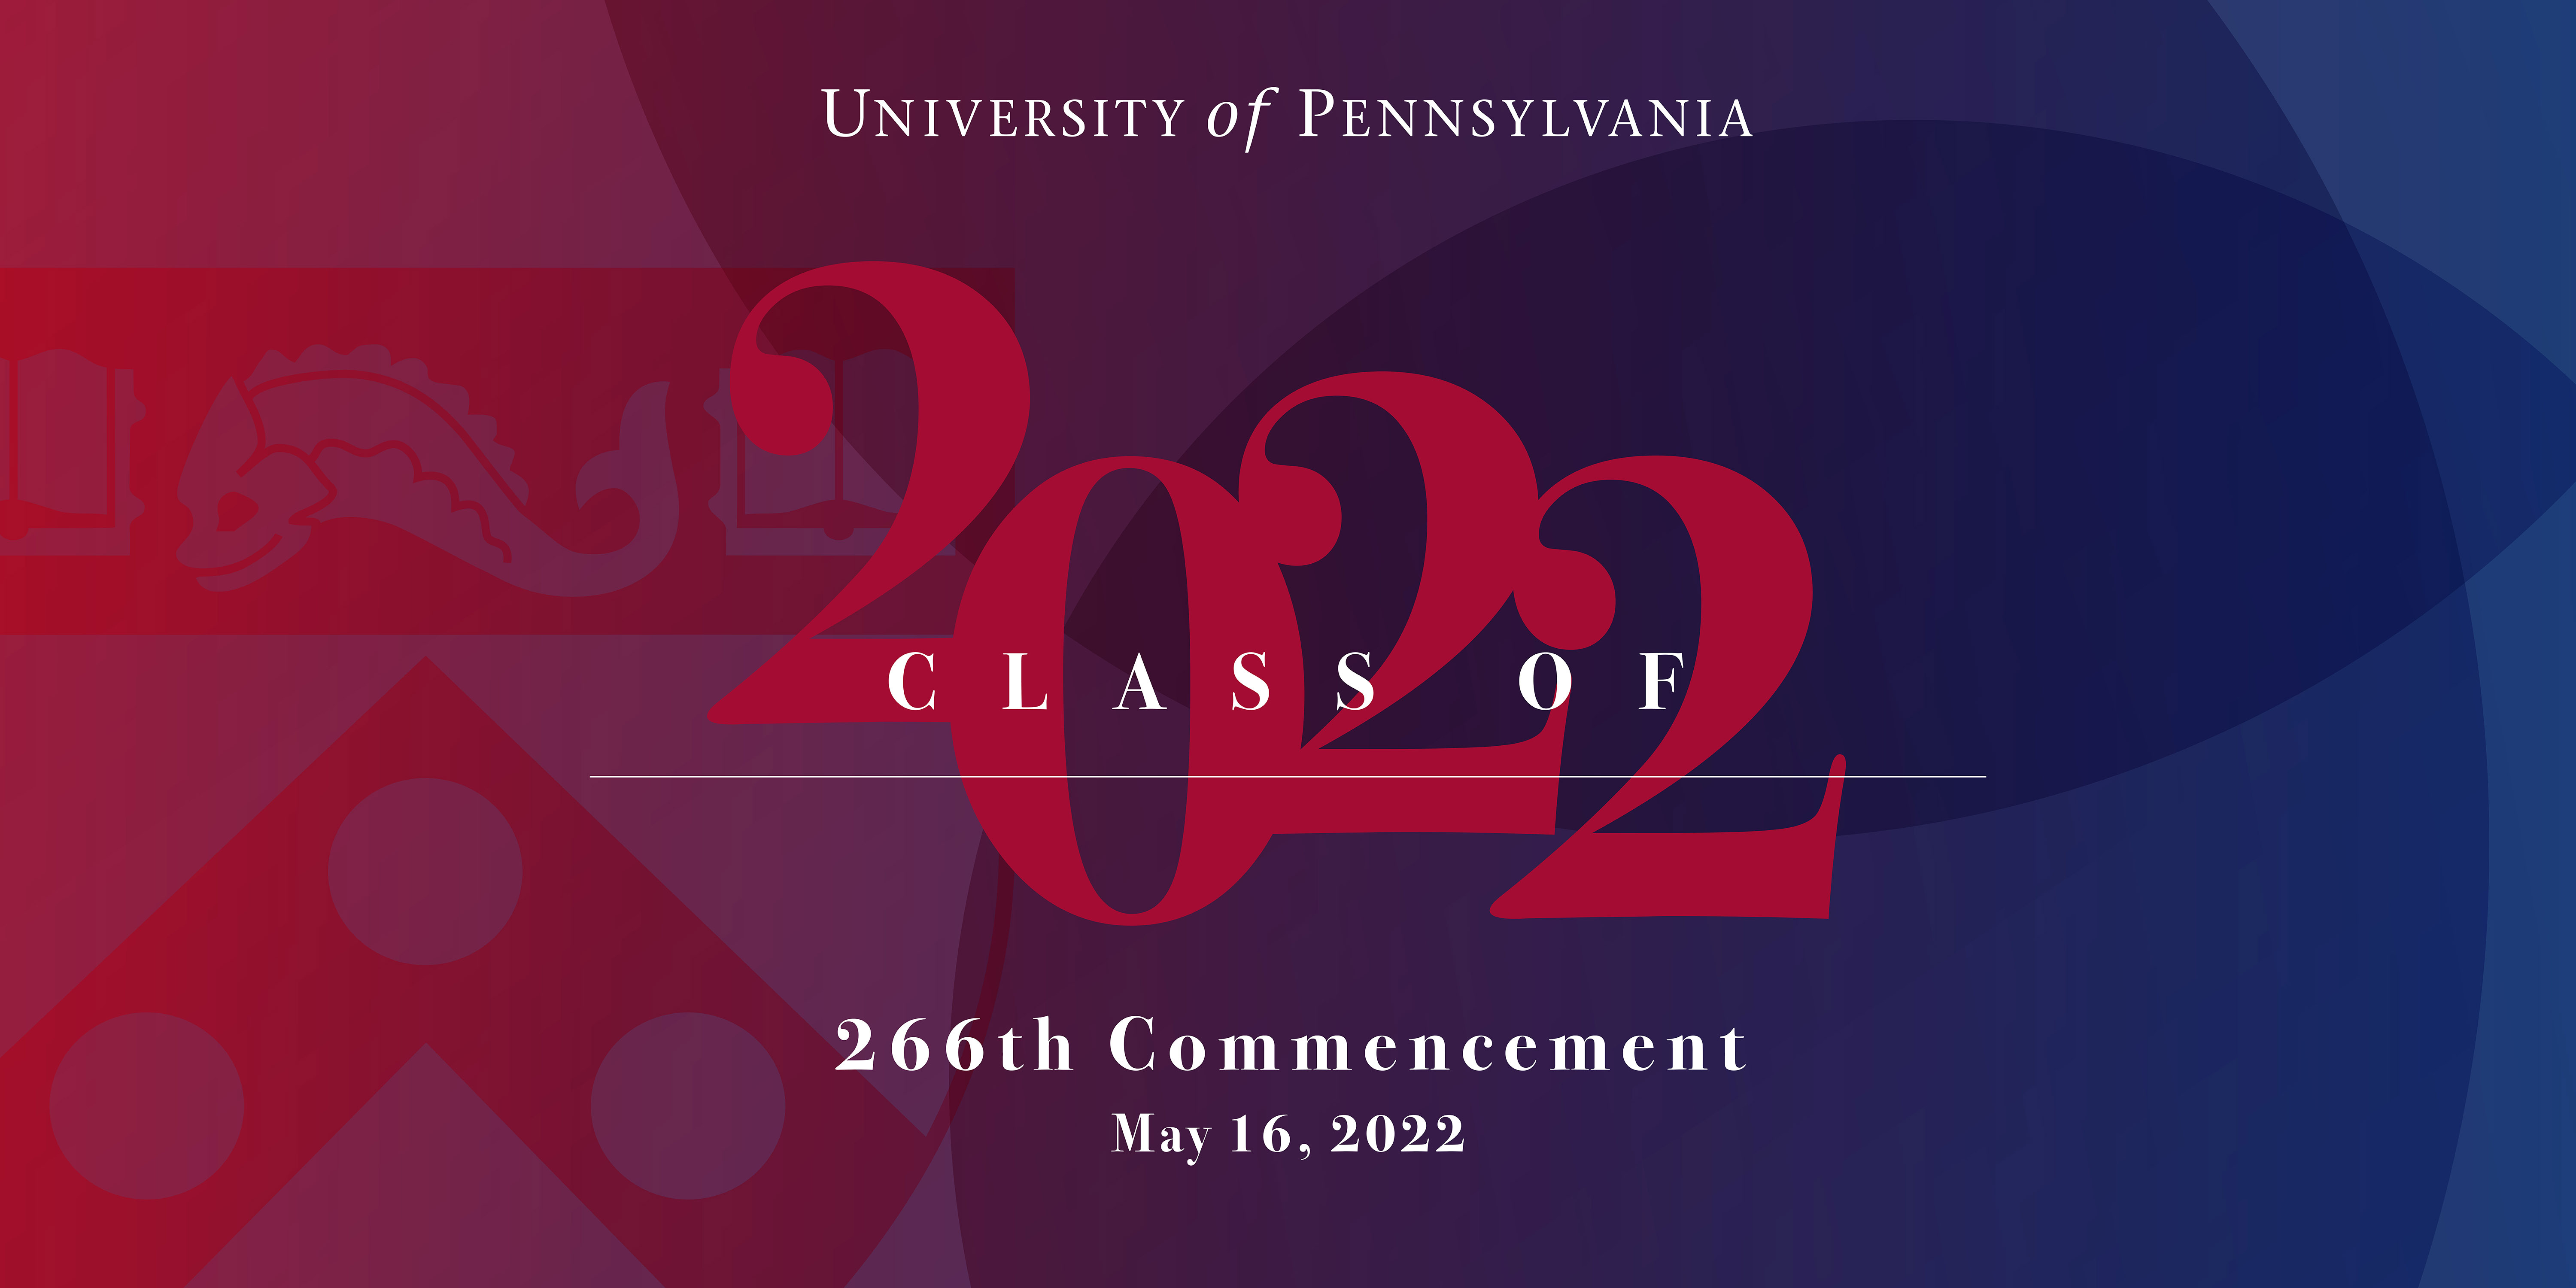 Class of 2022 University of Pennsylvania 266th Commencement May 16, 2022